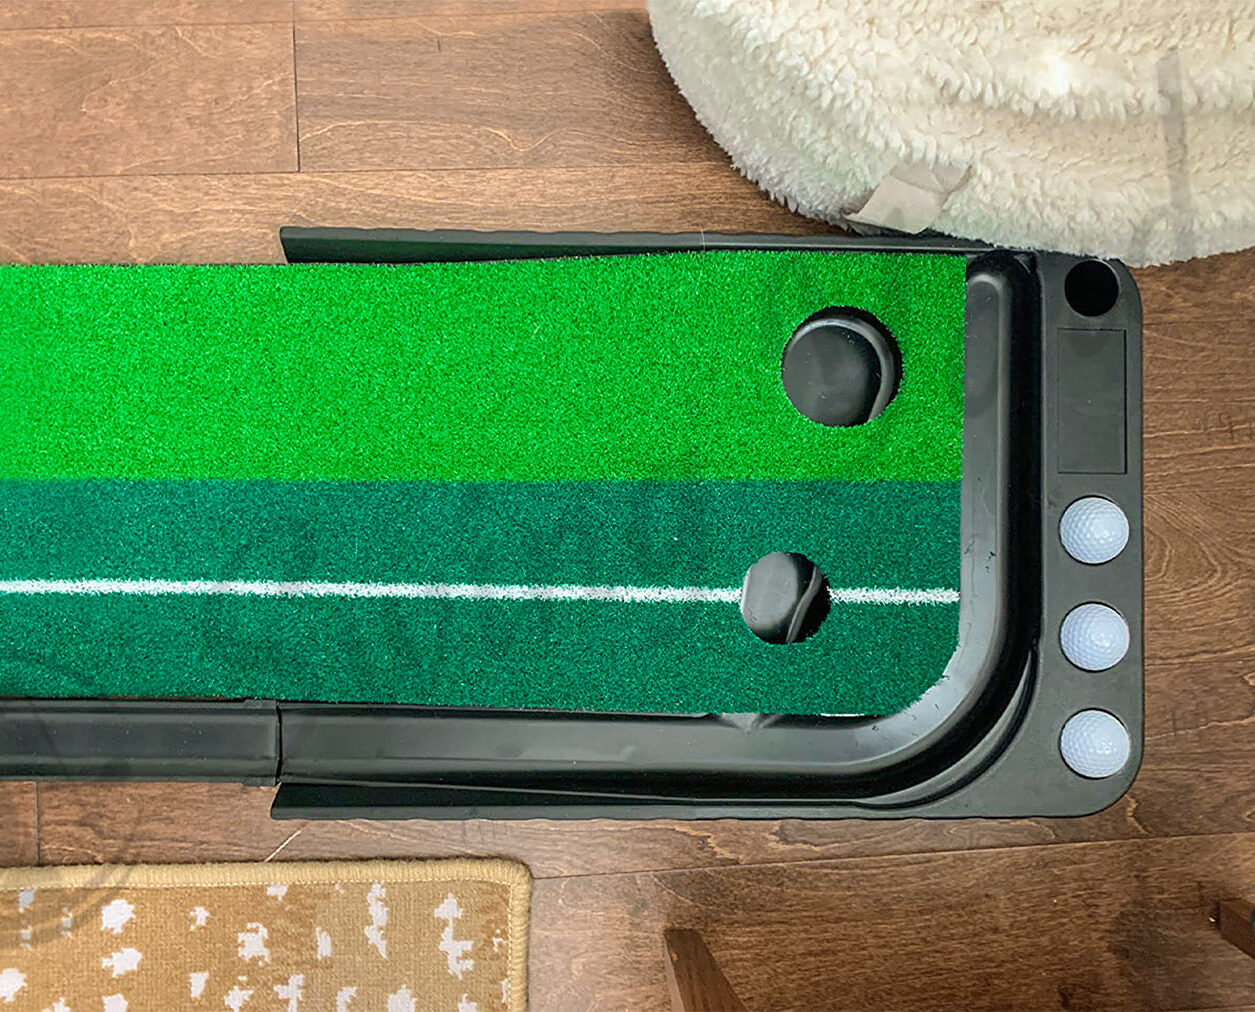 Close up of the Abco Tech Indoor Putting Set